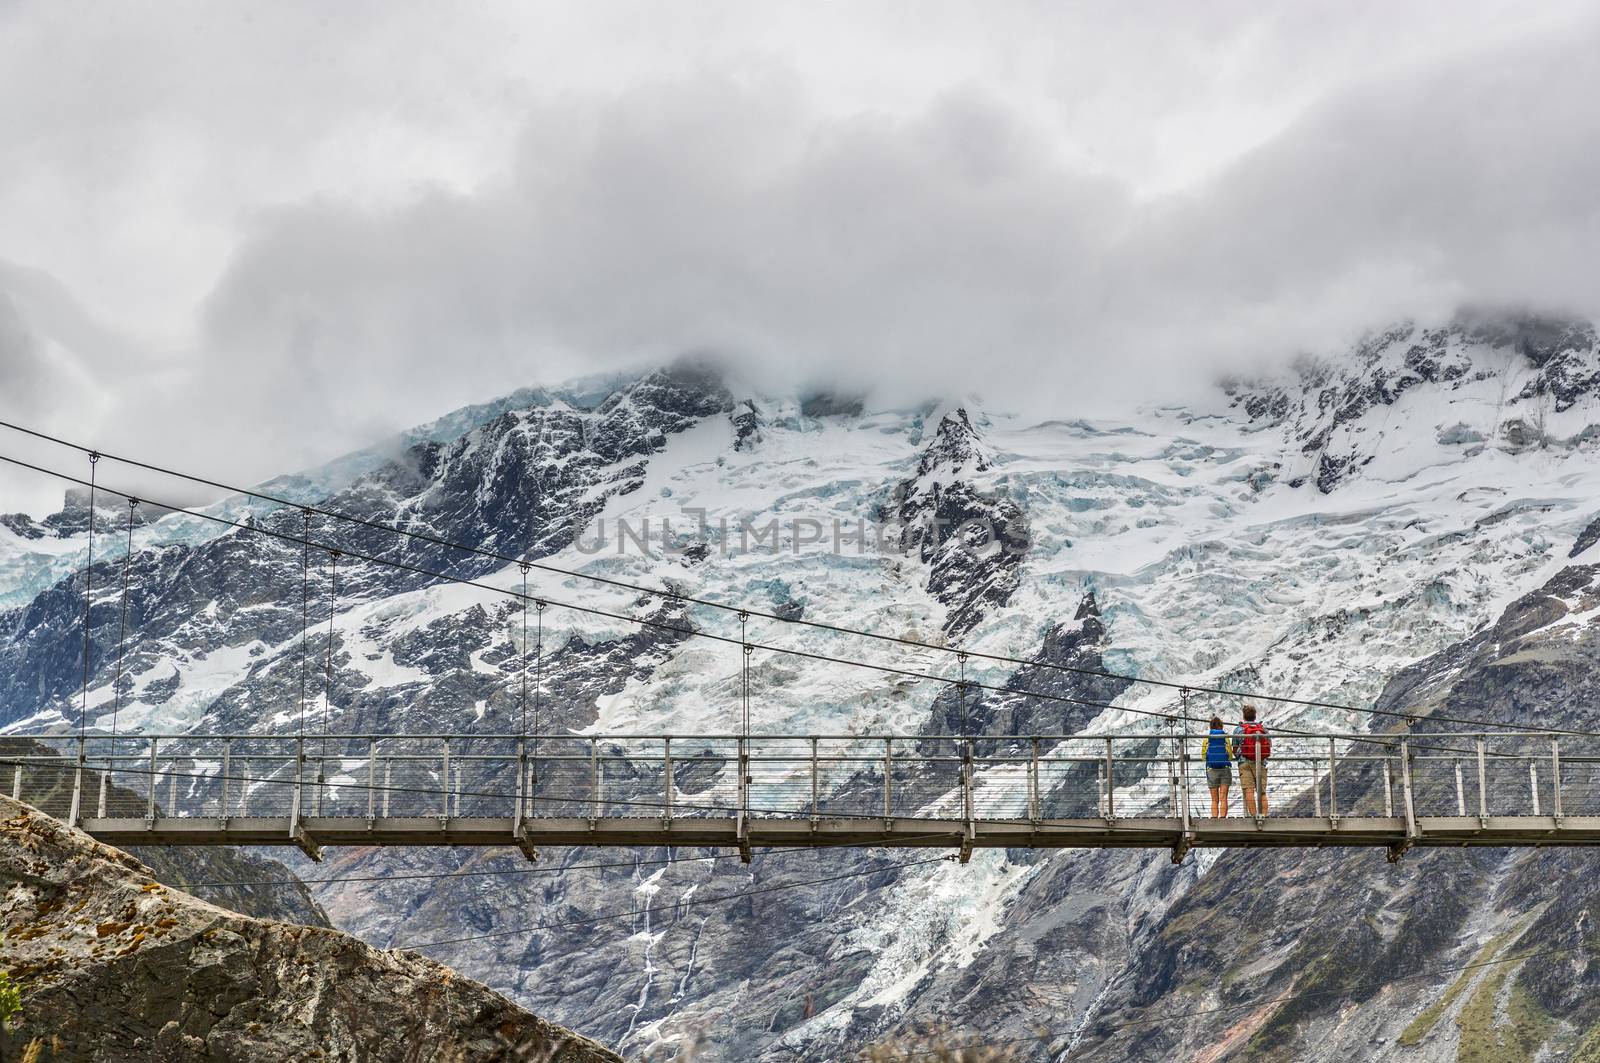 Hooker Valley Track hiking trail, New Zealand. Second swing bridge crossing the river on the Hooker Valley track, Aoraki, Mt Cook National Park with snow capped mountains landscape by Maridav